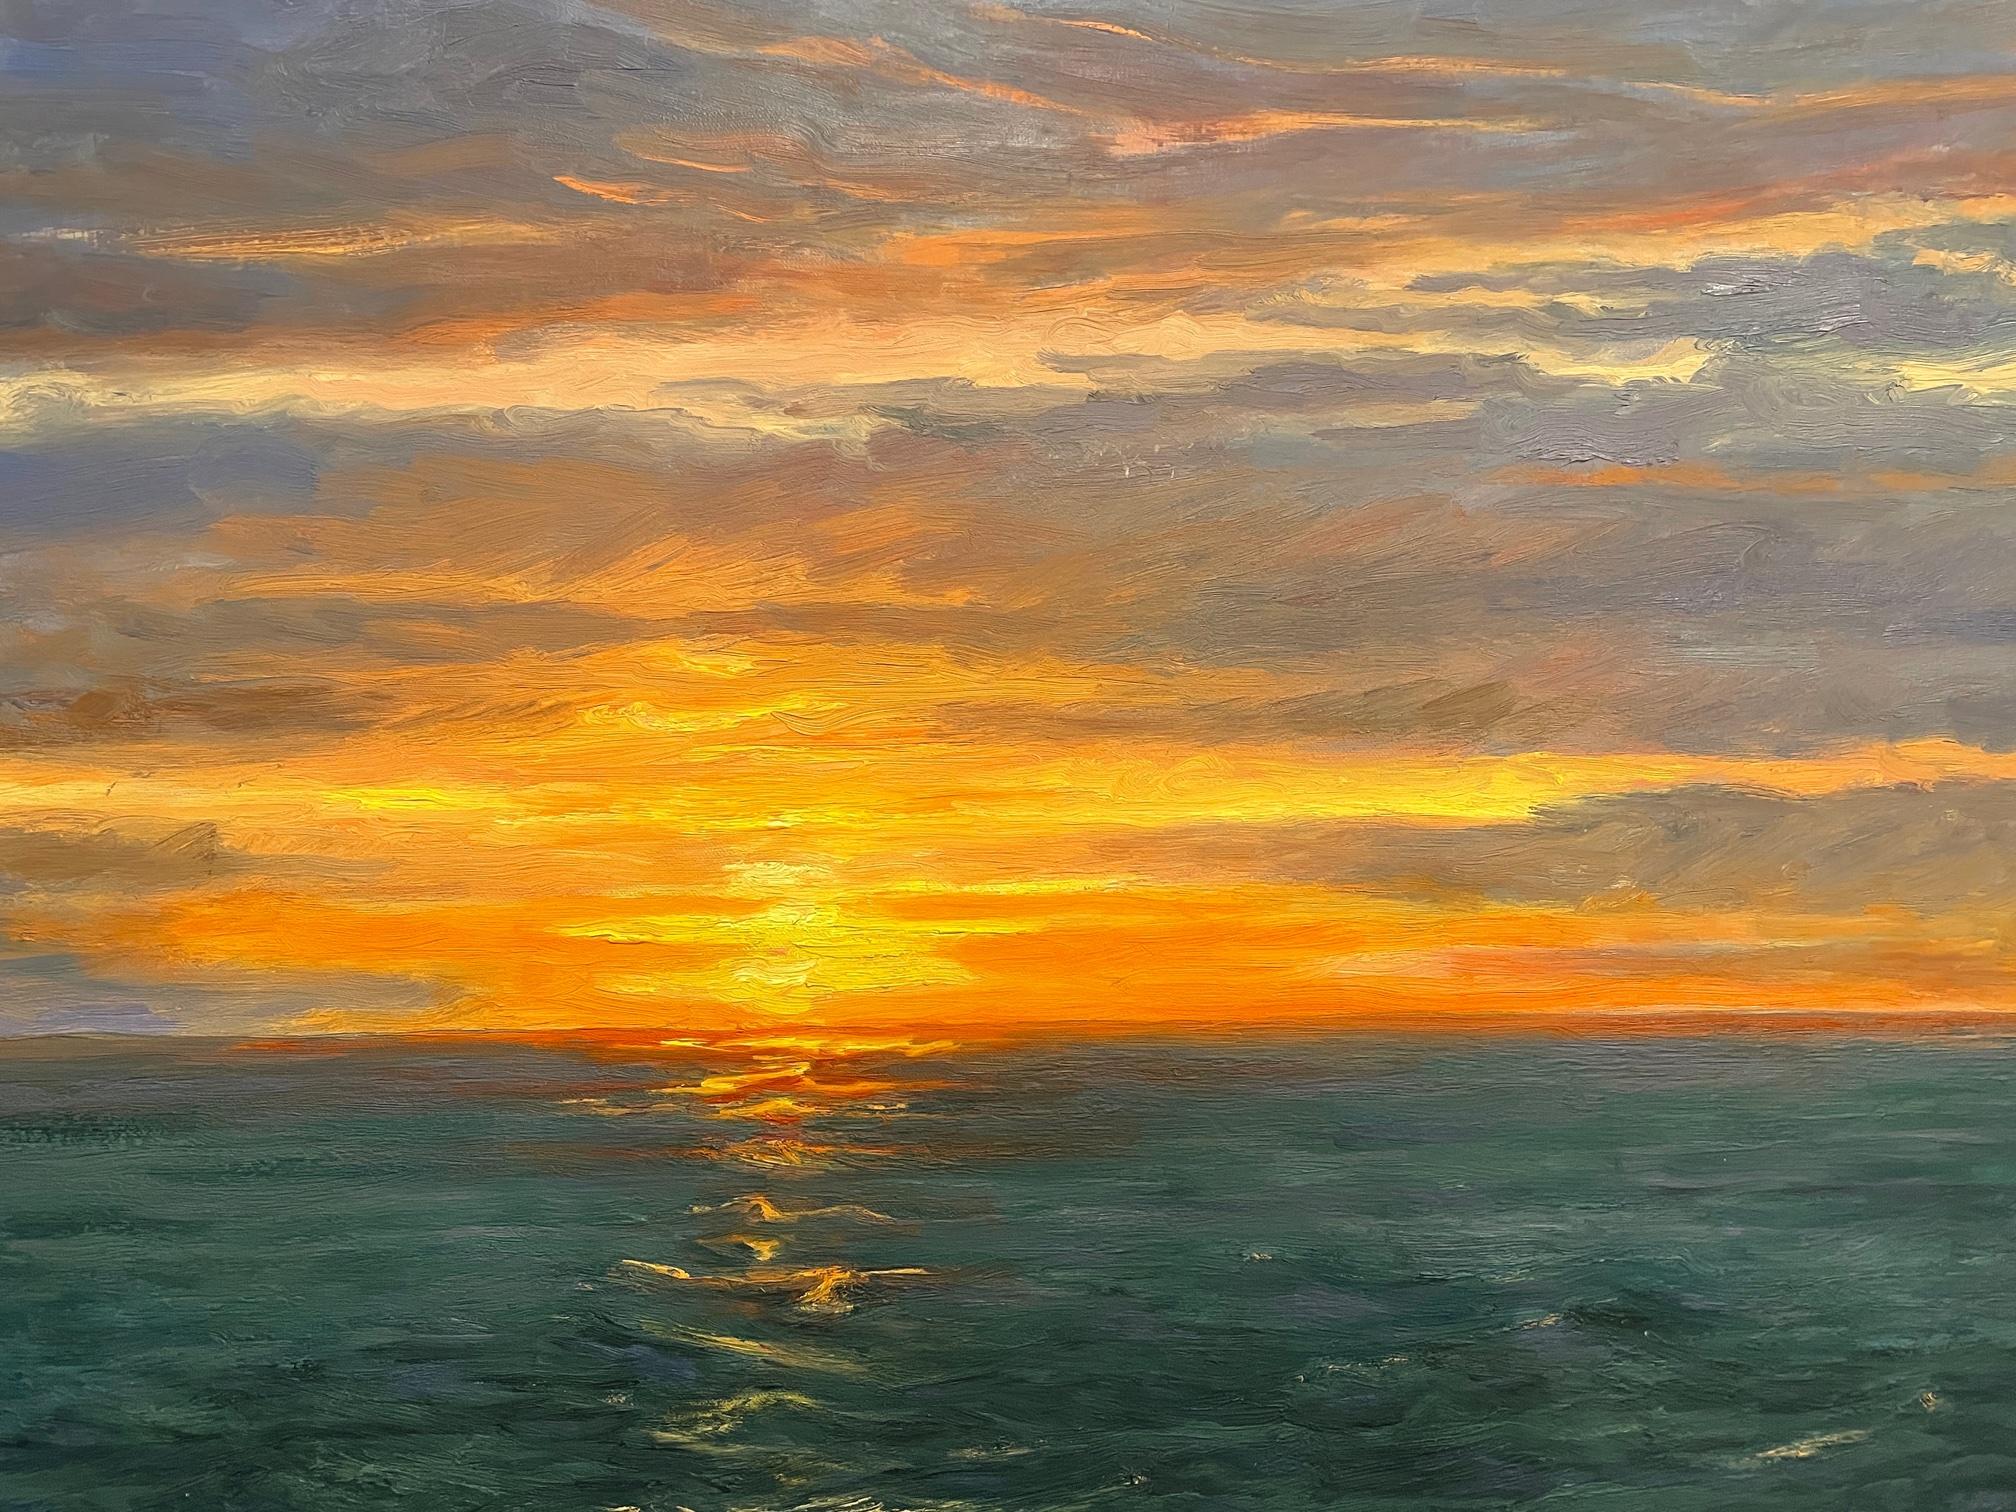 Seascape with sunlight through clouds on the horizon. Title - Twilight - Painting by Carl Scorza